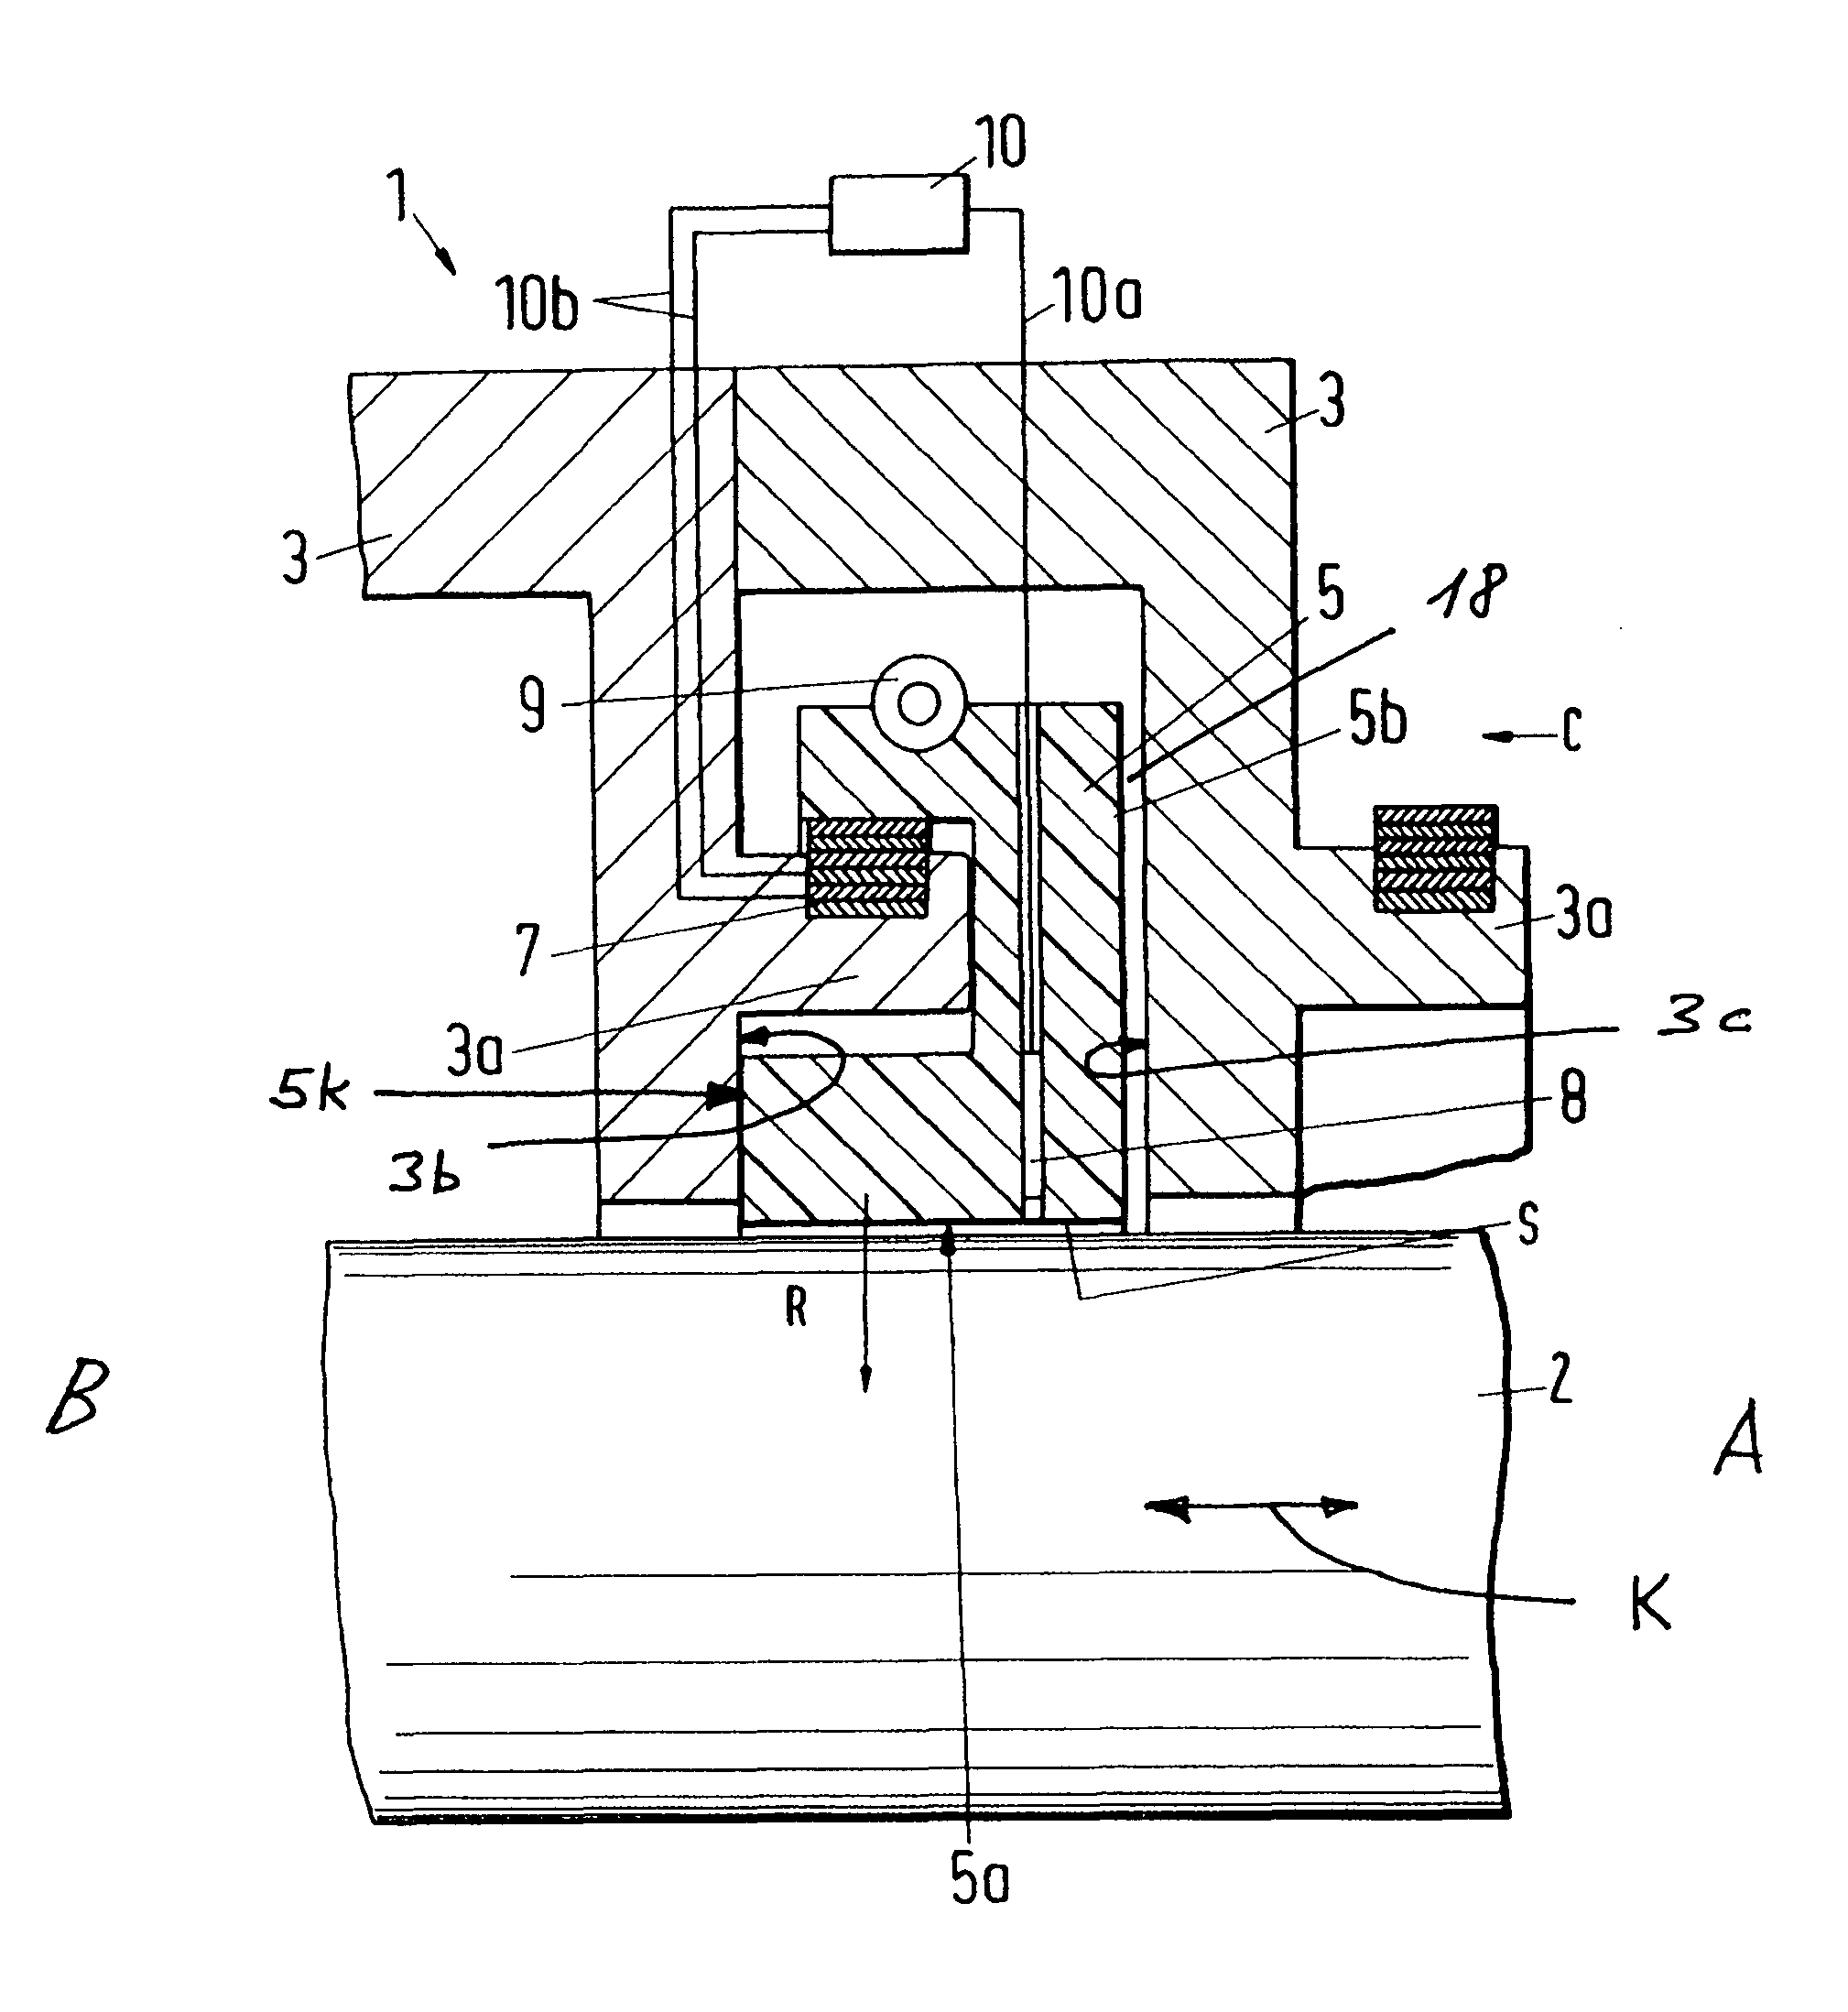 Dry-running piston rod sealing arrangement, and method for sealing a piston rod using one such arrangement